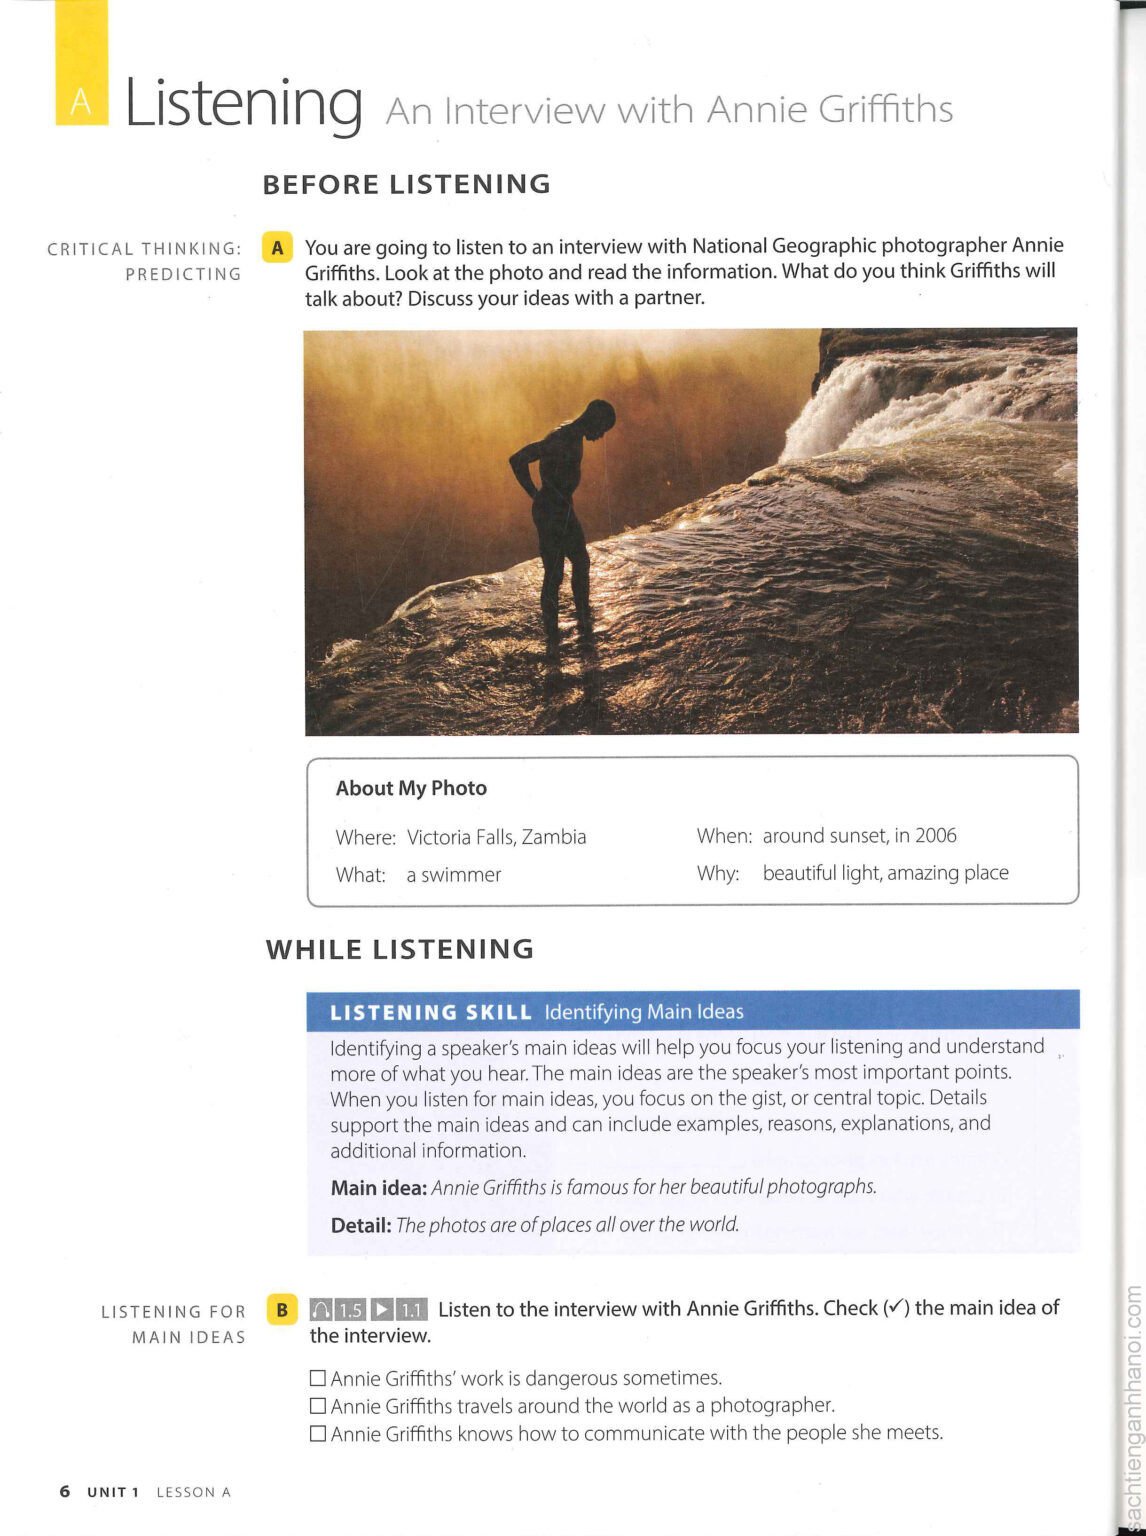 unlock 2 listening speaking and critical thinking pdf